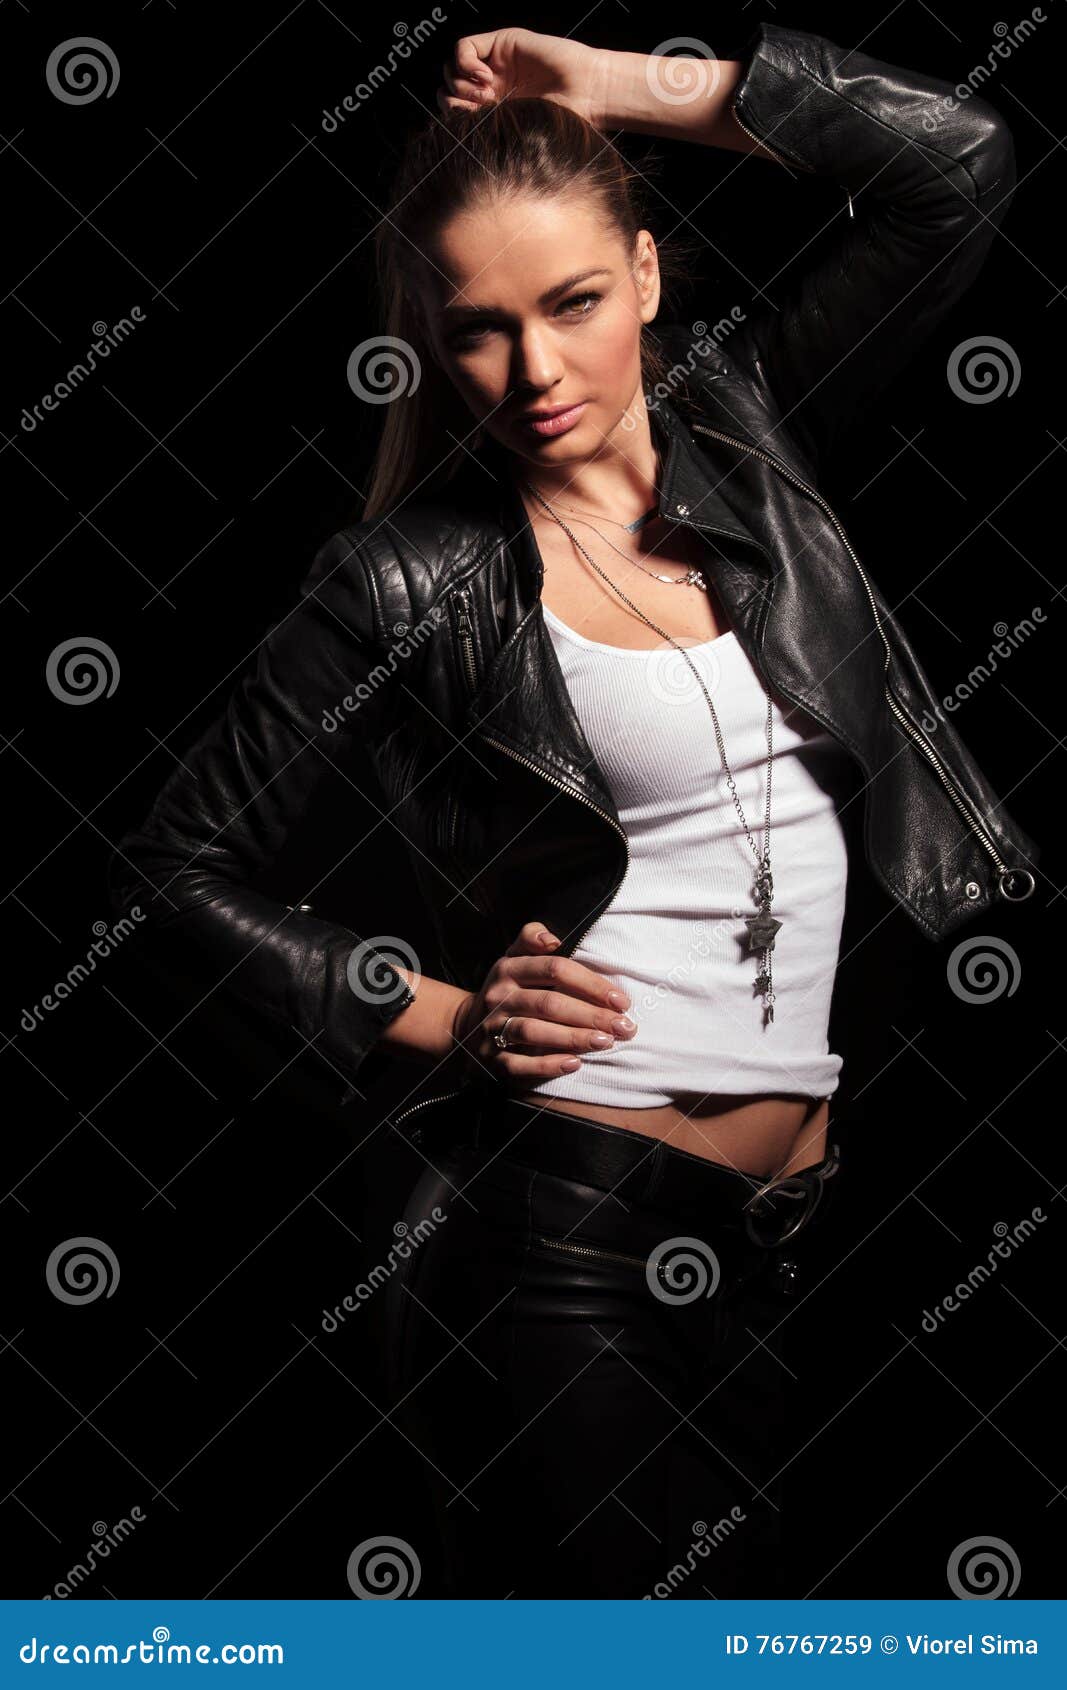 Blonde Woman in Leather Clothes Poses Stock Image - Image of hold ...